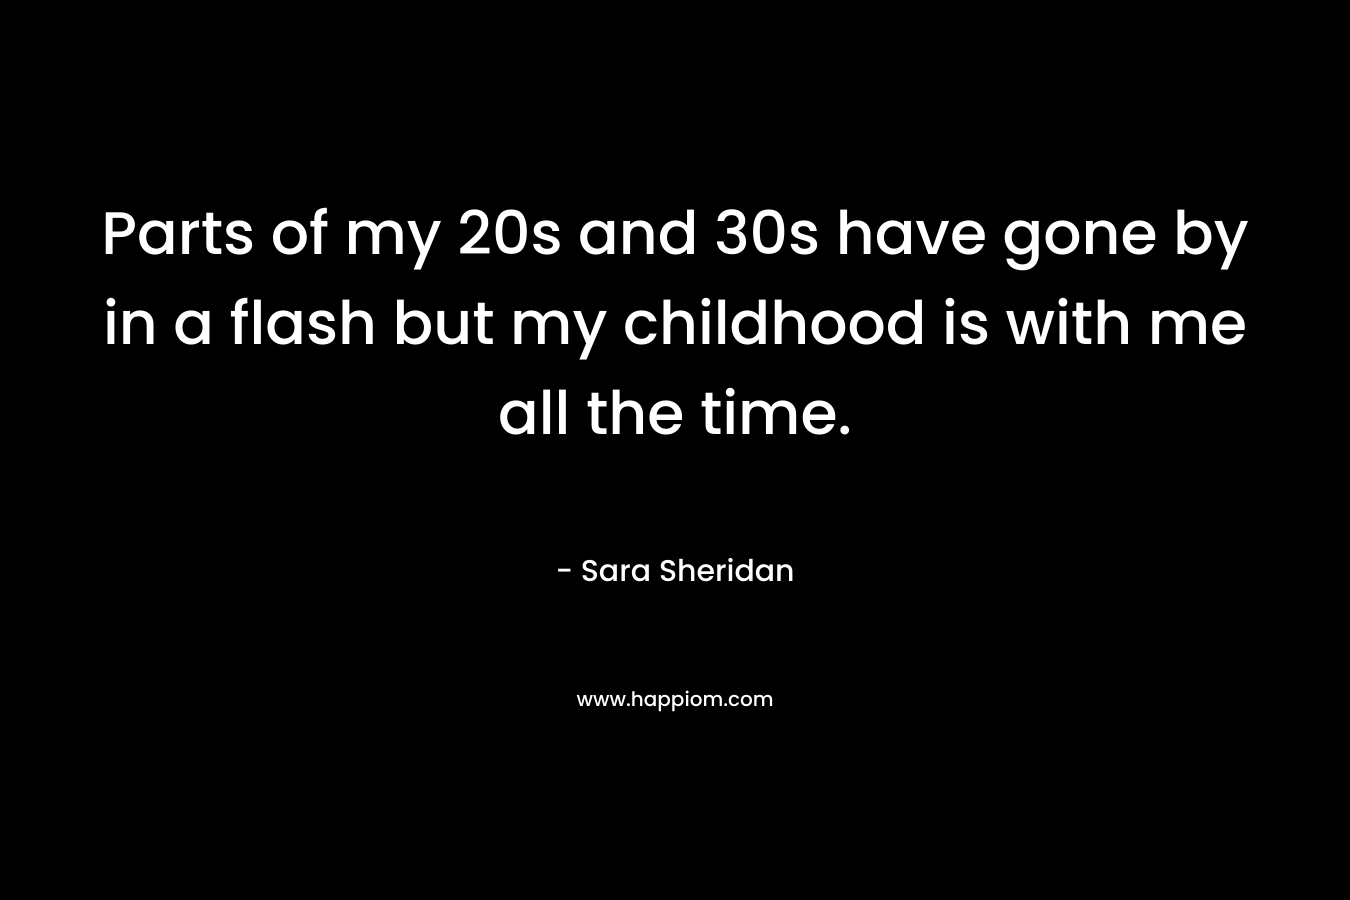 Parts of my 20s and 30s have gone by in a flash but my childhood is with me all the time. – Sara Sheridan